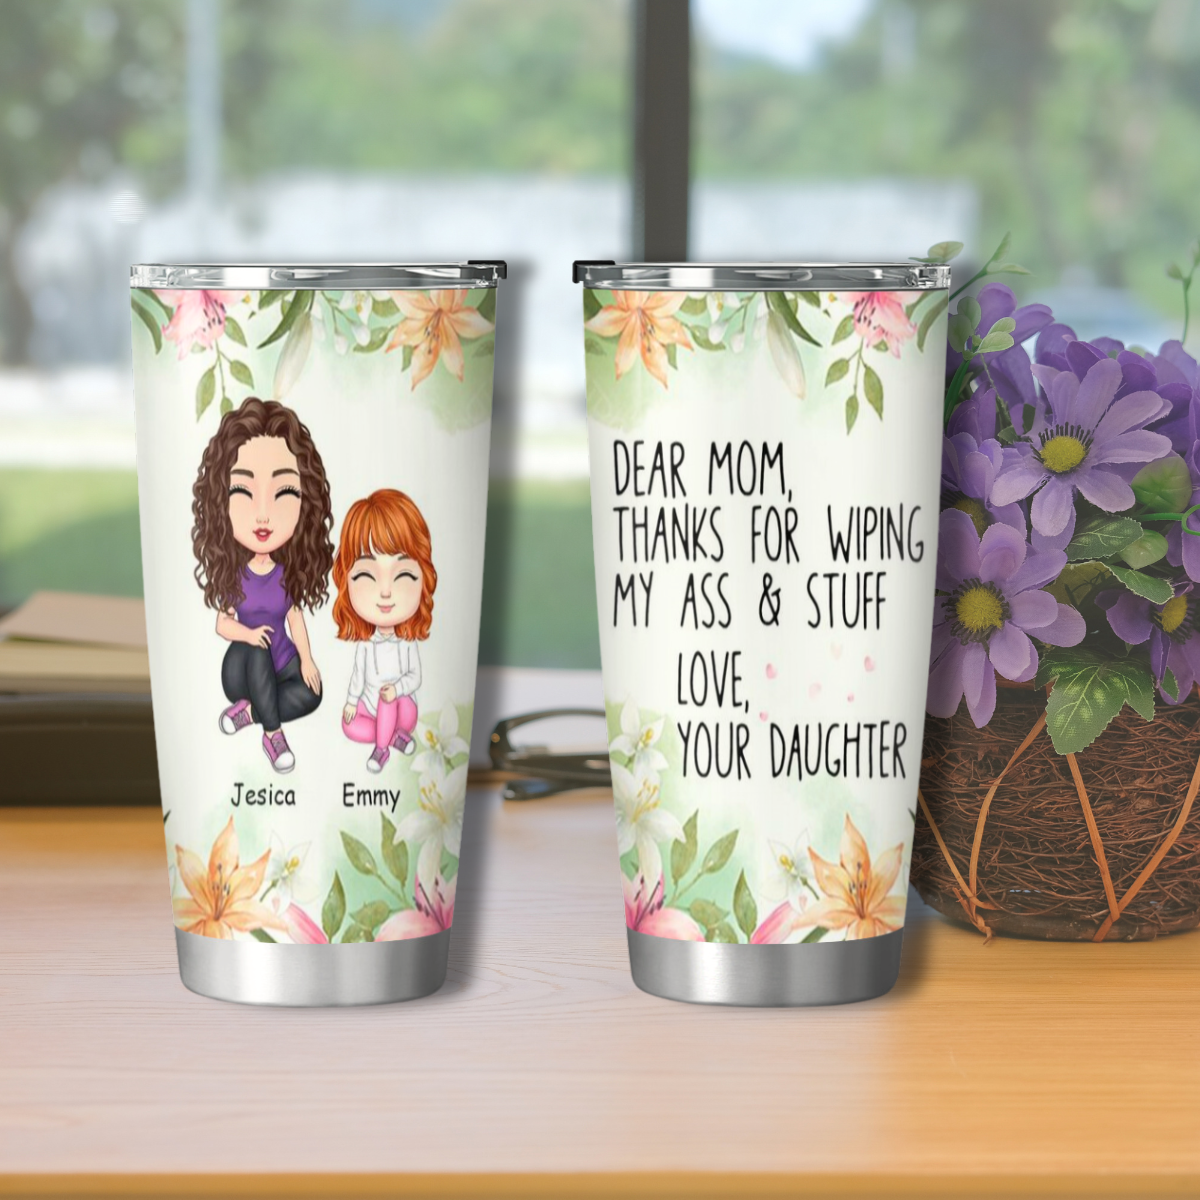 Thanks for Wiping My Ass & Stuff- Personalized Tumbler for Mom